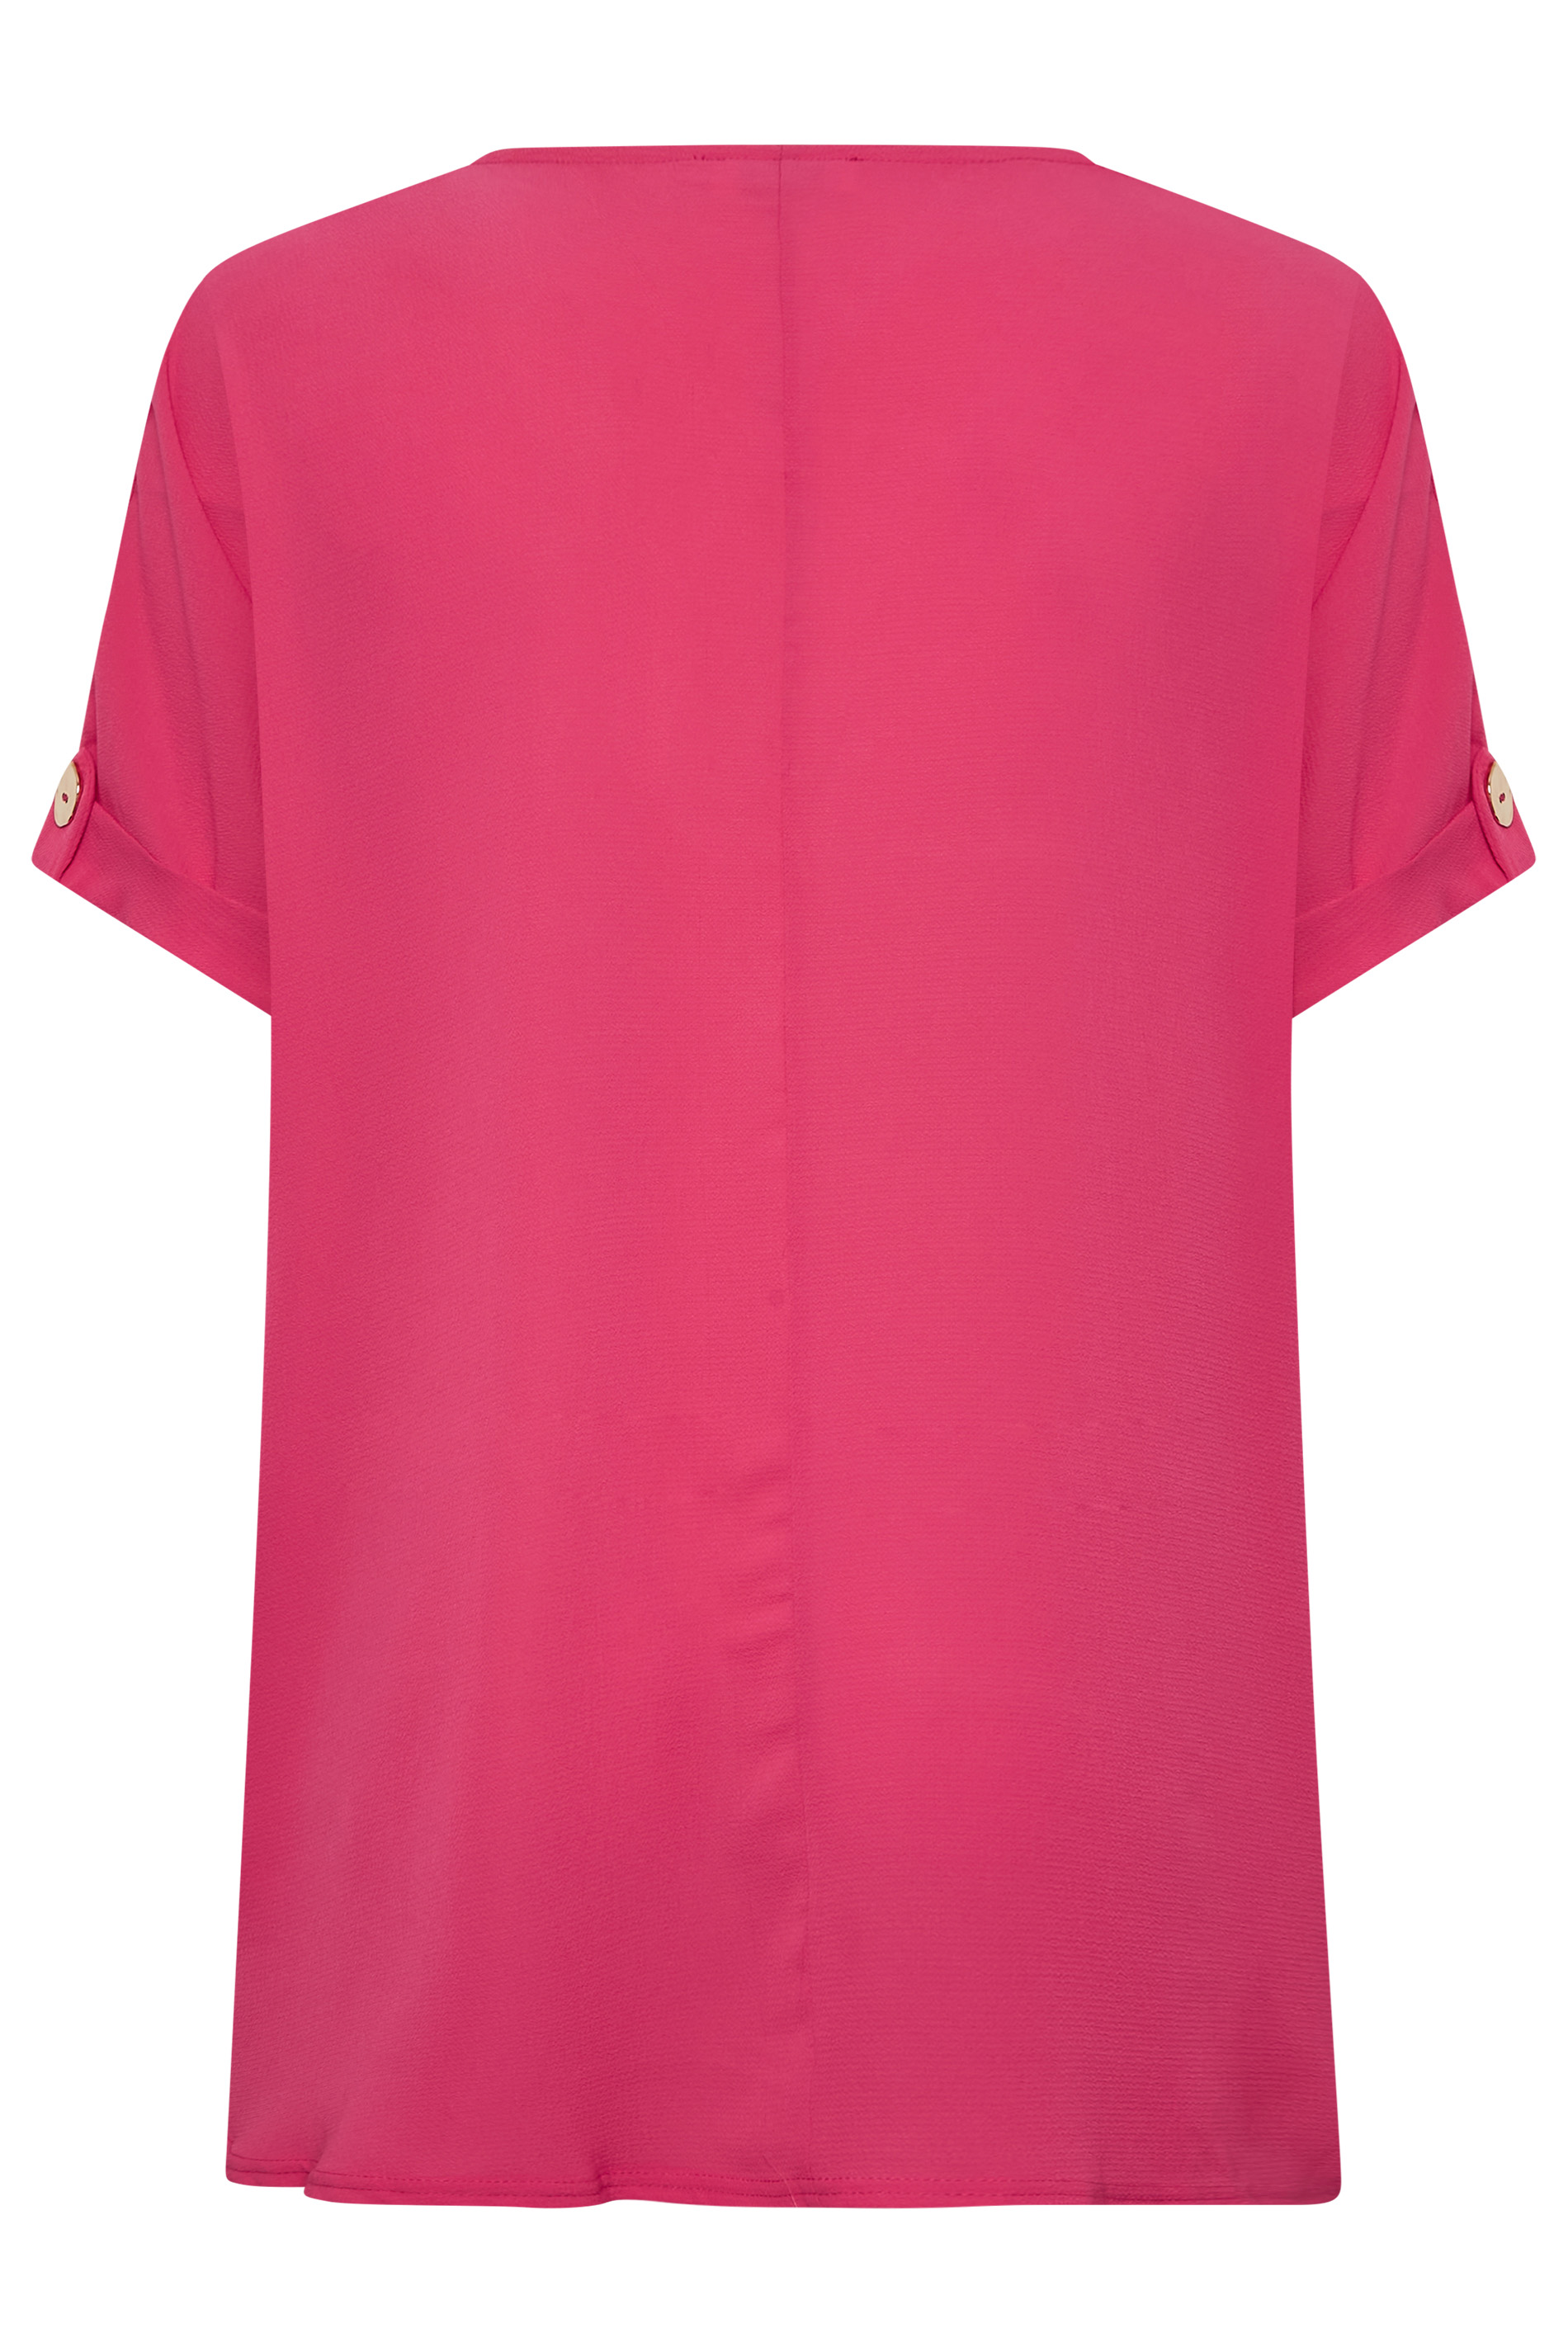 YOURS Curve Plus Size Hot Pink Button Front Blouse | Yours Clothing